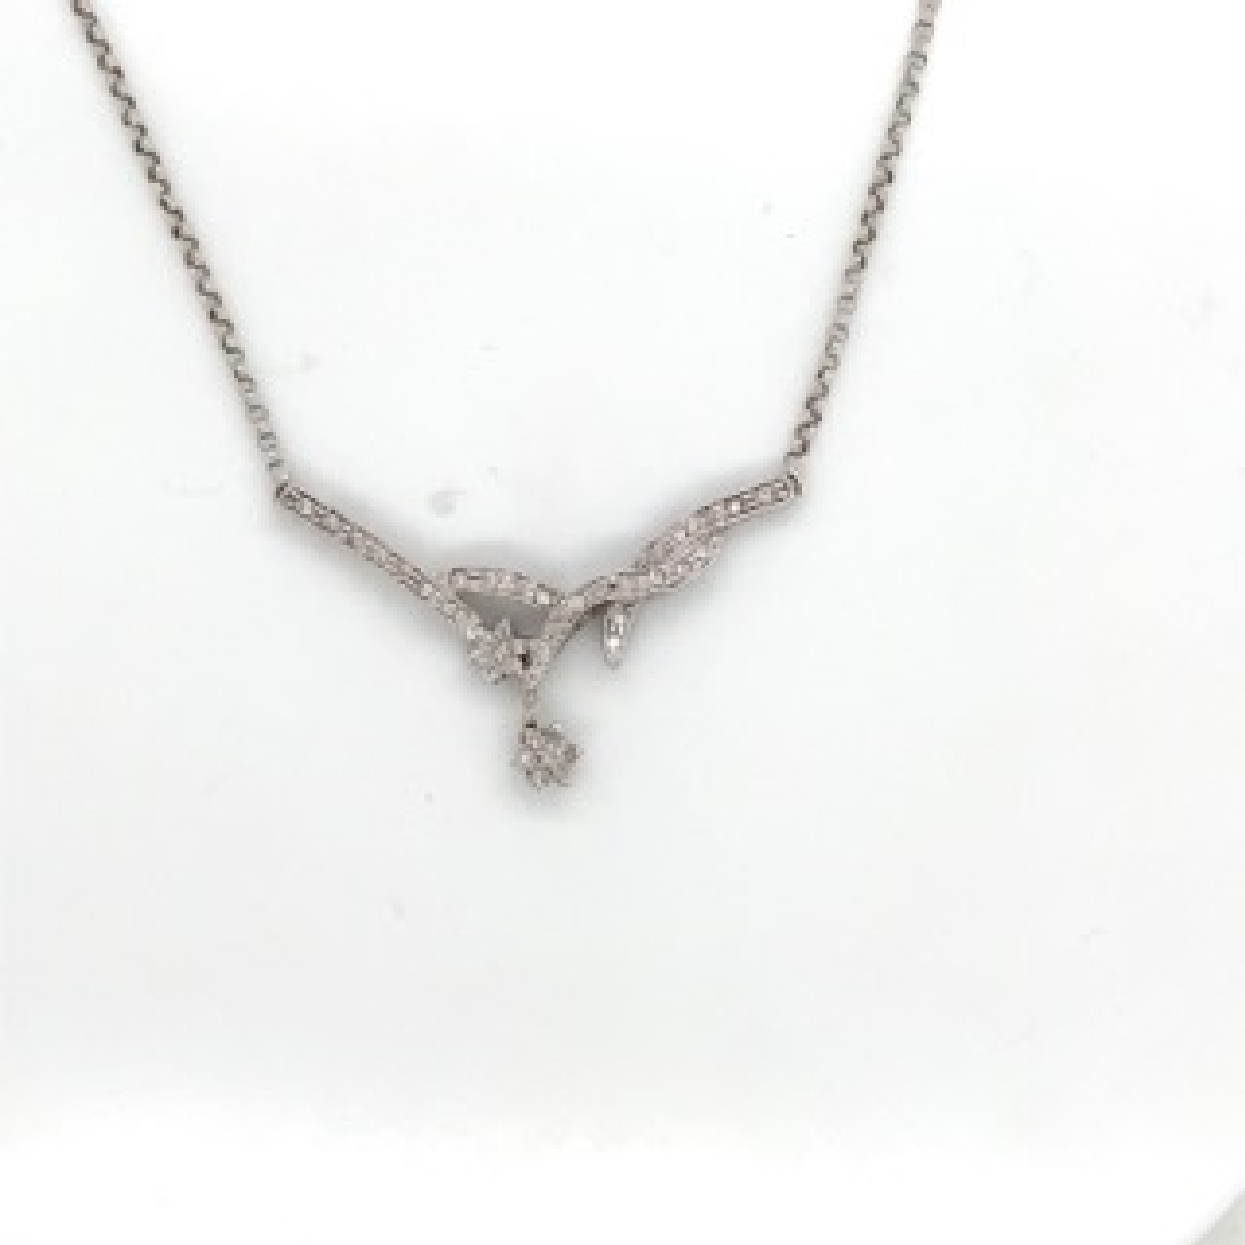 14K White Gold Diamond Necklace with Floral Motif

18 Inches